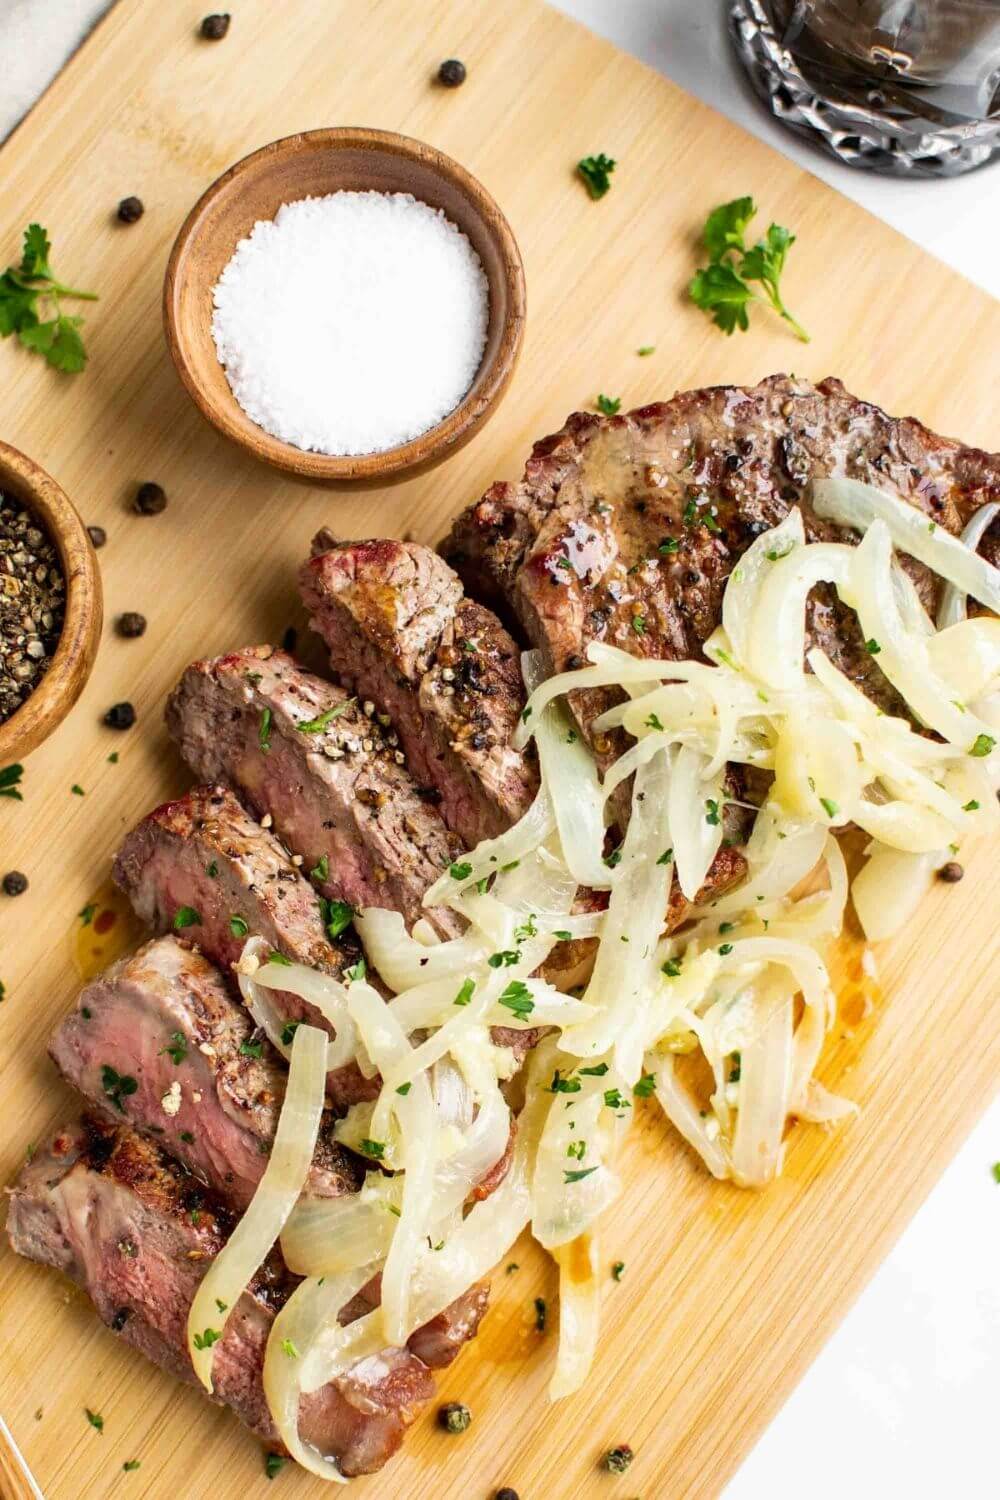 Easy Grilled Beef Steak with Garlic Butter Foreman Grill Recipe